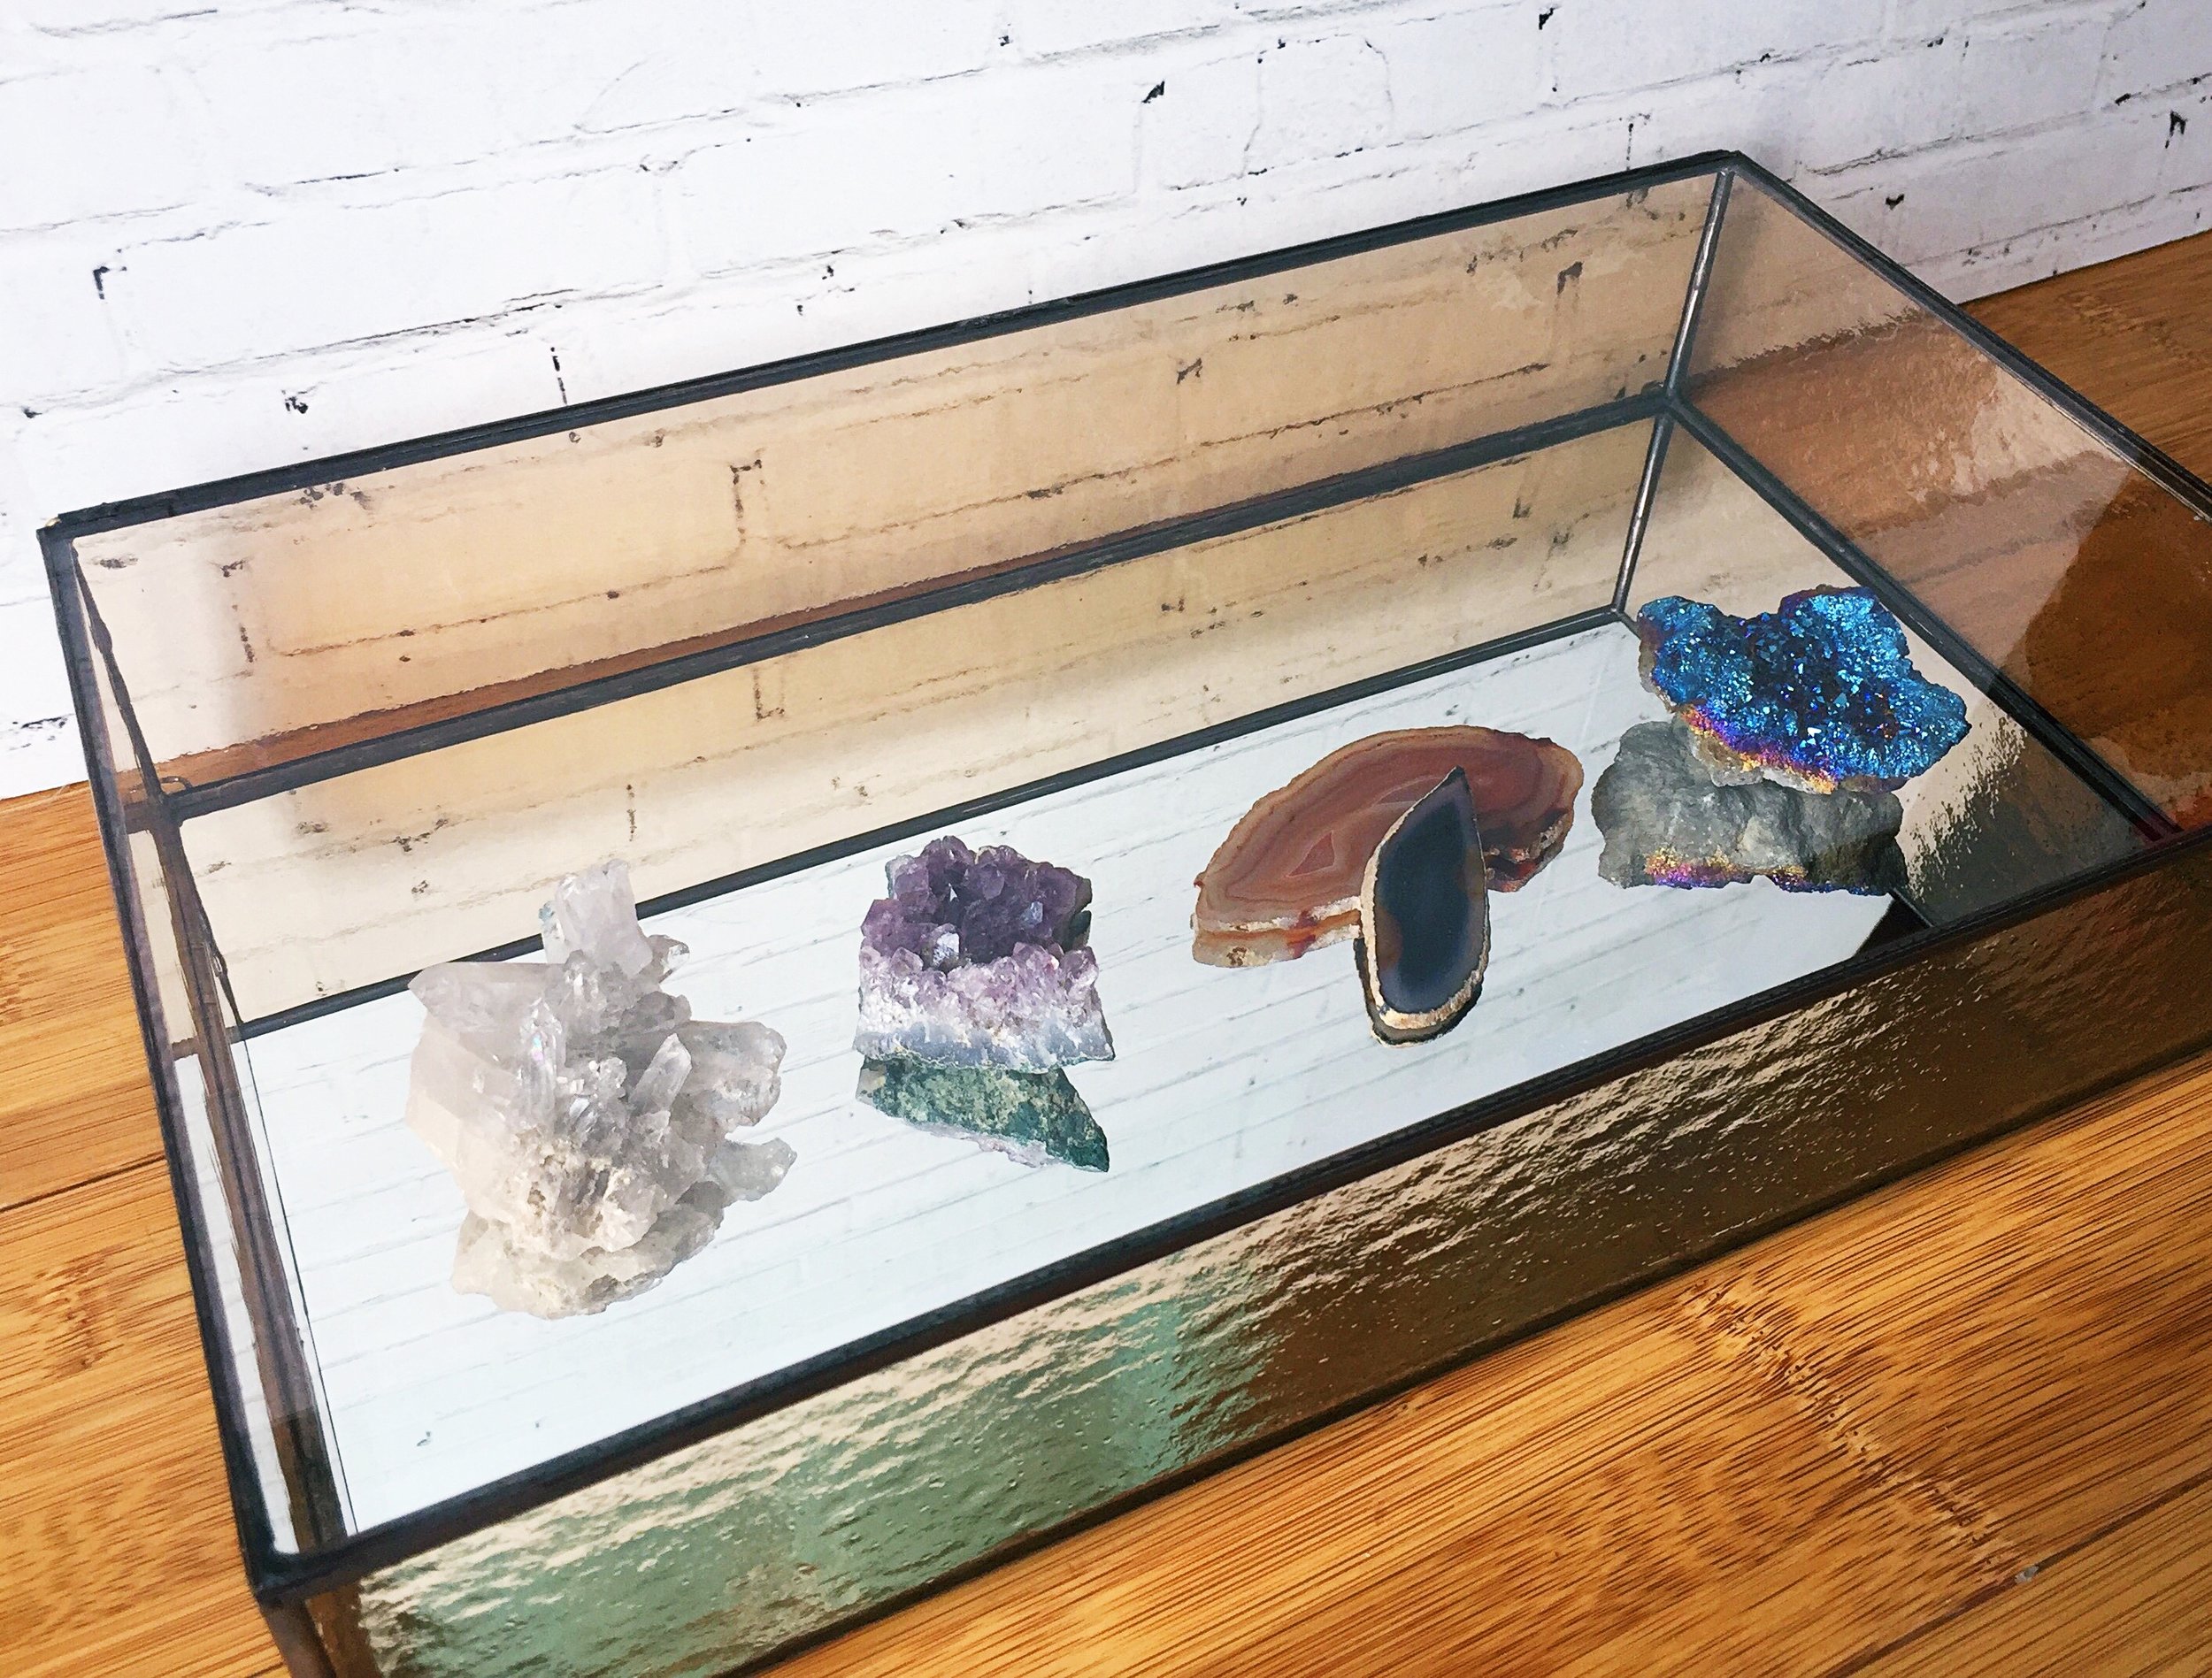 Jewelry Display Case for La Loba in Oakland